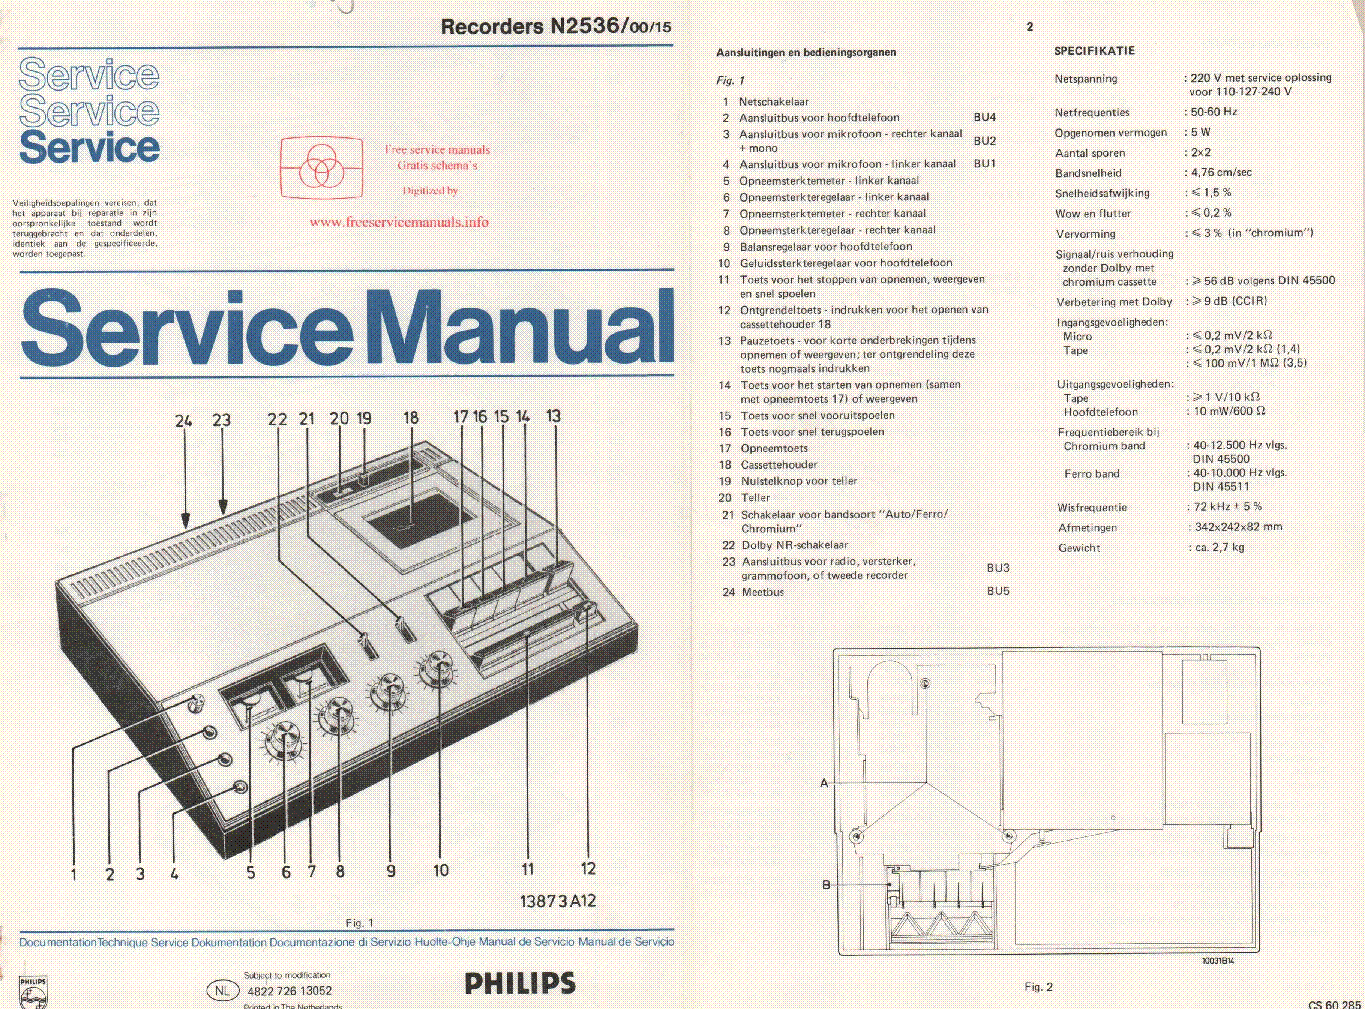 PHILIPS N2536 SM service manual (1st page)